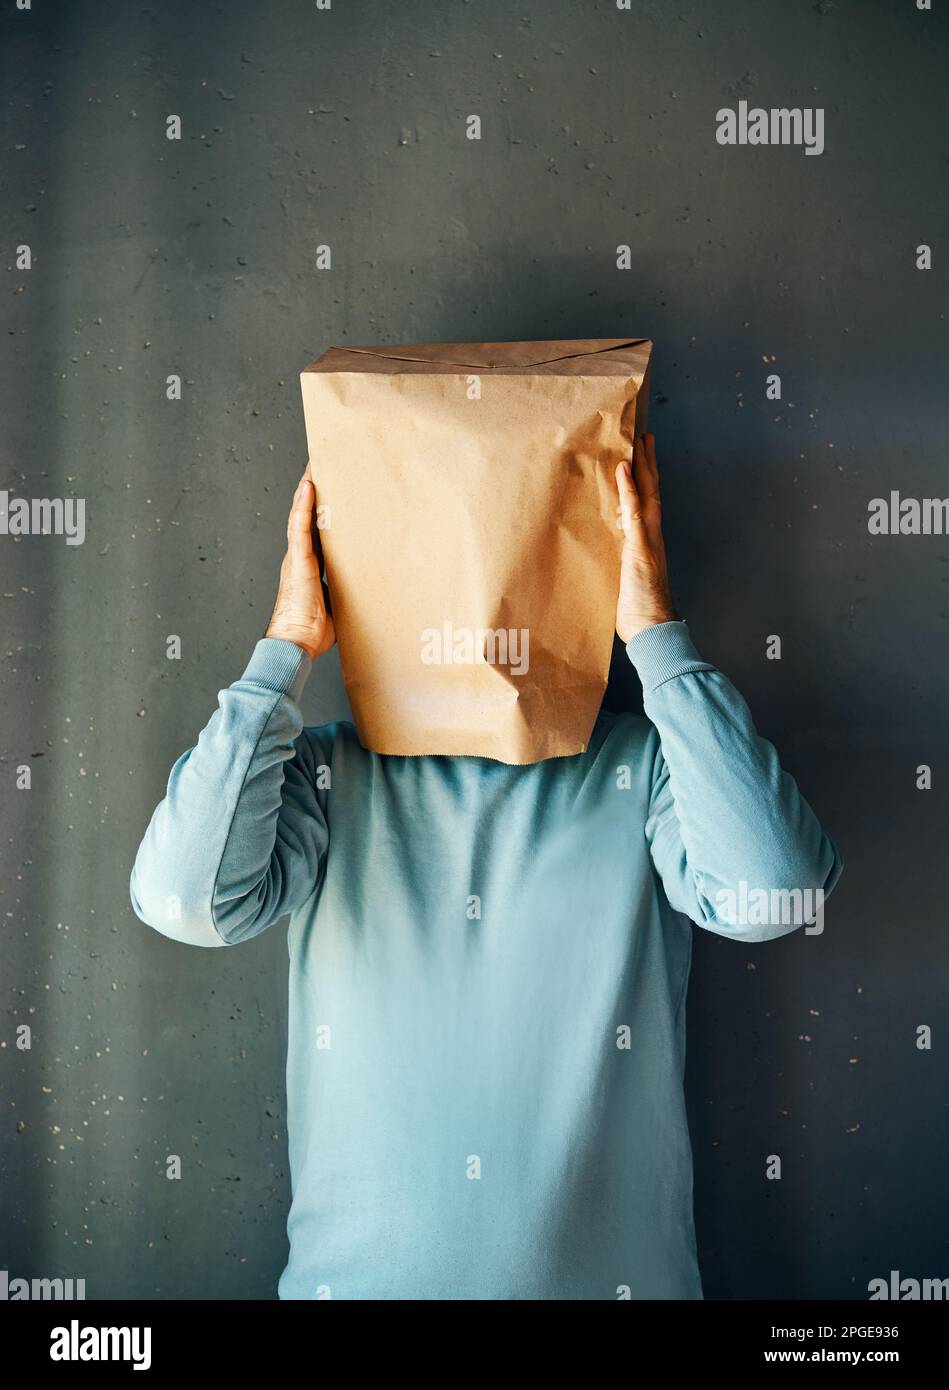 Upset man with a paper bag on head touching temples, suffering from strong tension headache over gray background. Emotion concept Stock Photo